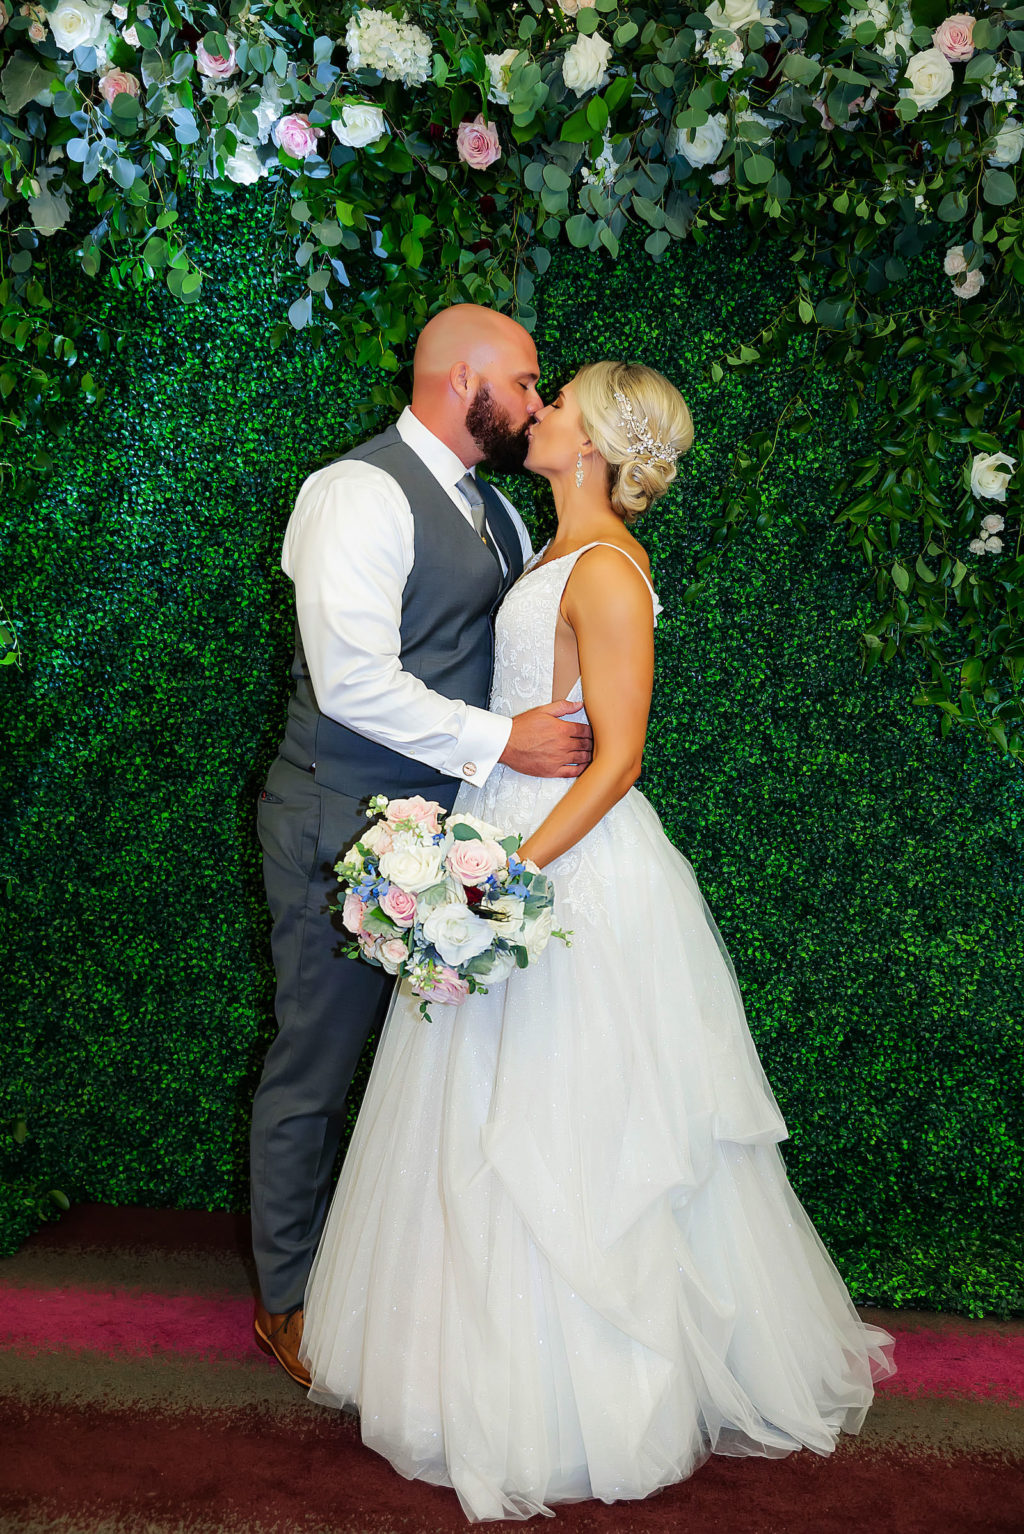 Indoor Bride and Groom Portrait in front of Boxwood Hedge Greenery Wall with Blush Pink and White Roses and Dusty Blue Eucalyptus Greenery by Tampa Wedding Florist Monarch Events and Design | A Line Ballgown Tulle V Neck Lace Wedding Dress by Hayley Paige Designer | Groom Wearing Classic Charcoal Grey Suit